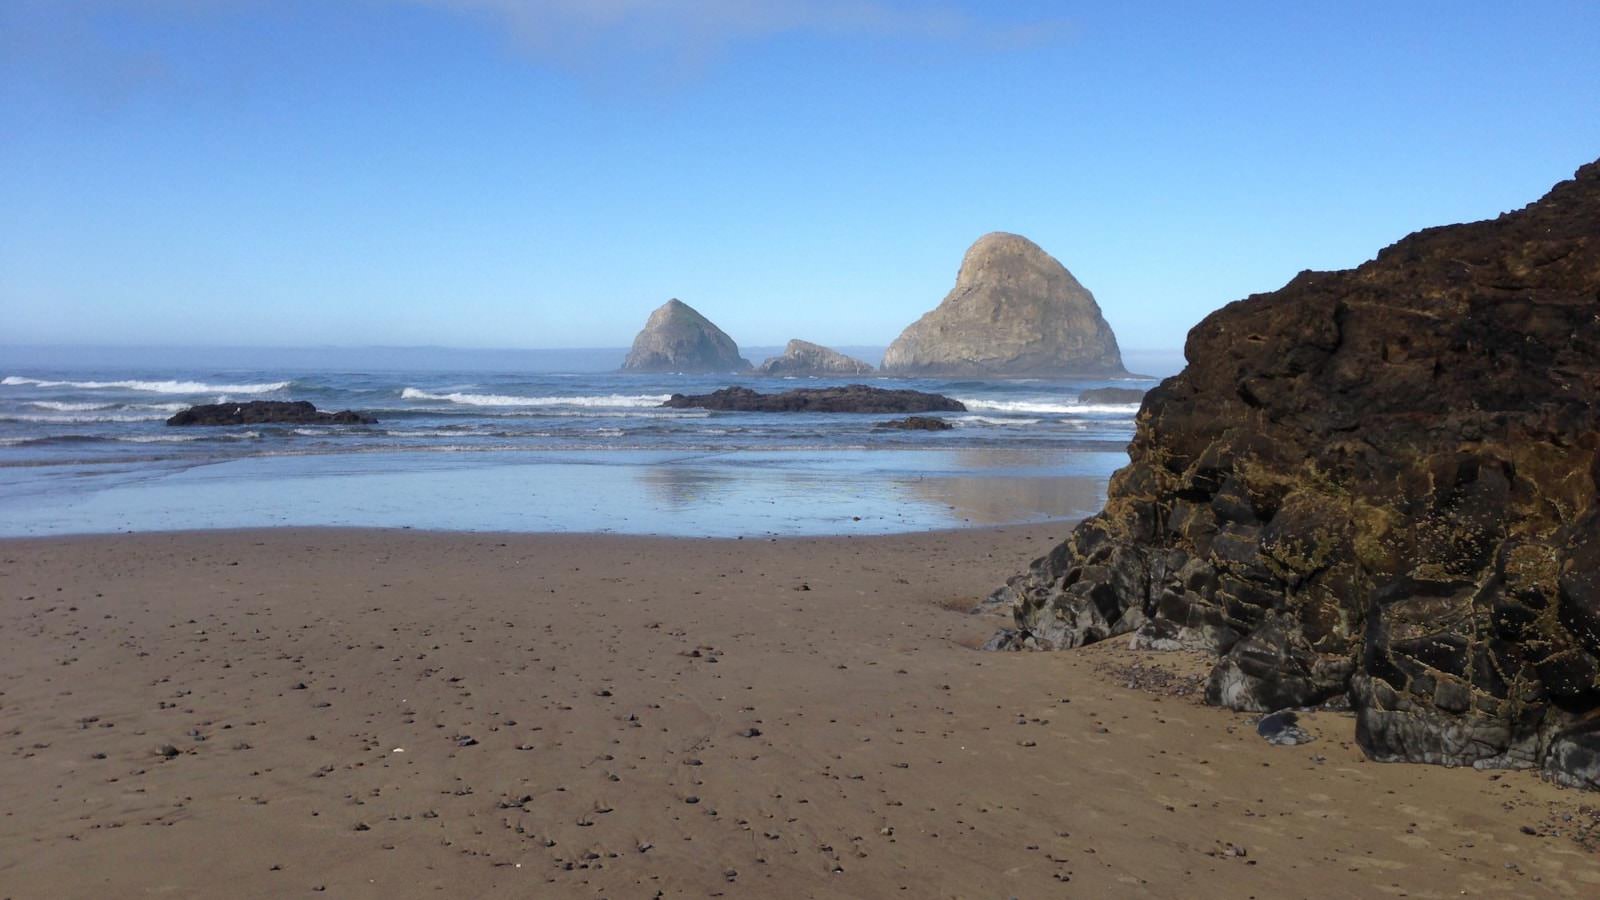 Wet sandy beach with soft rolling waves and three very large rocks in the protruding through the water